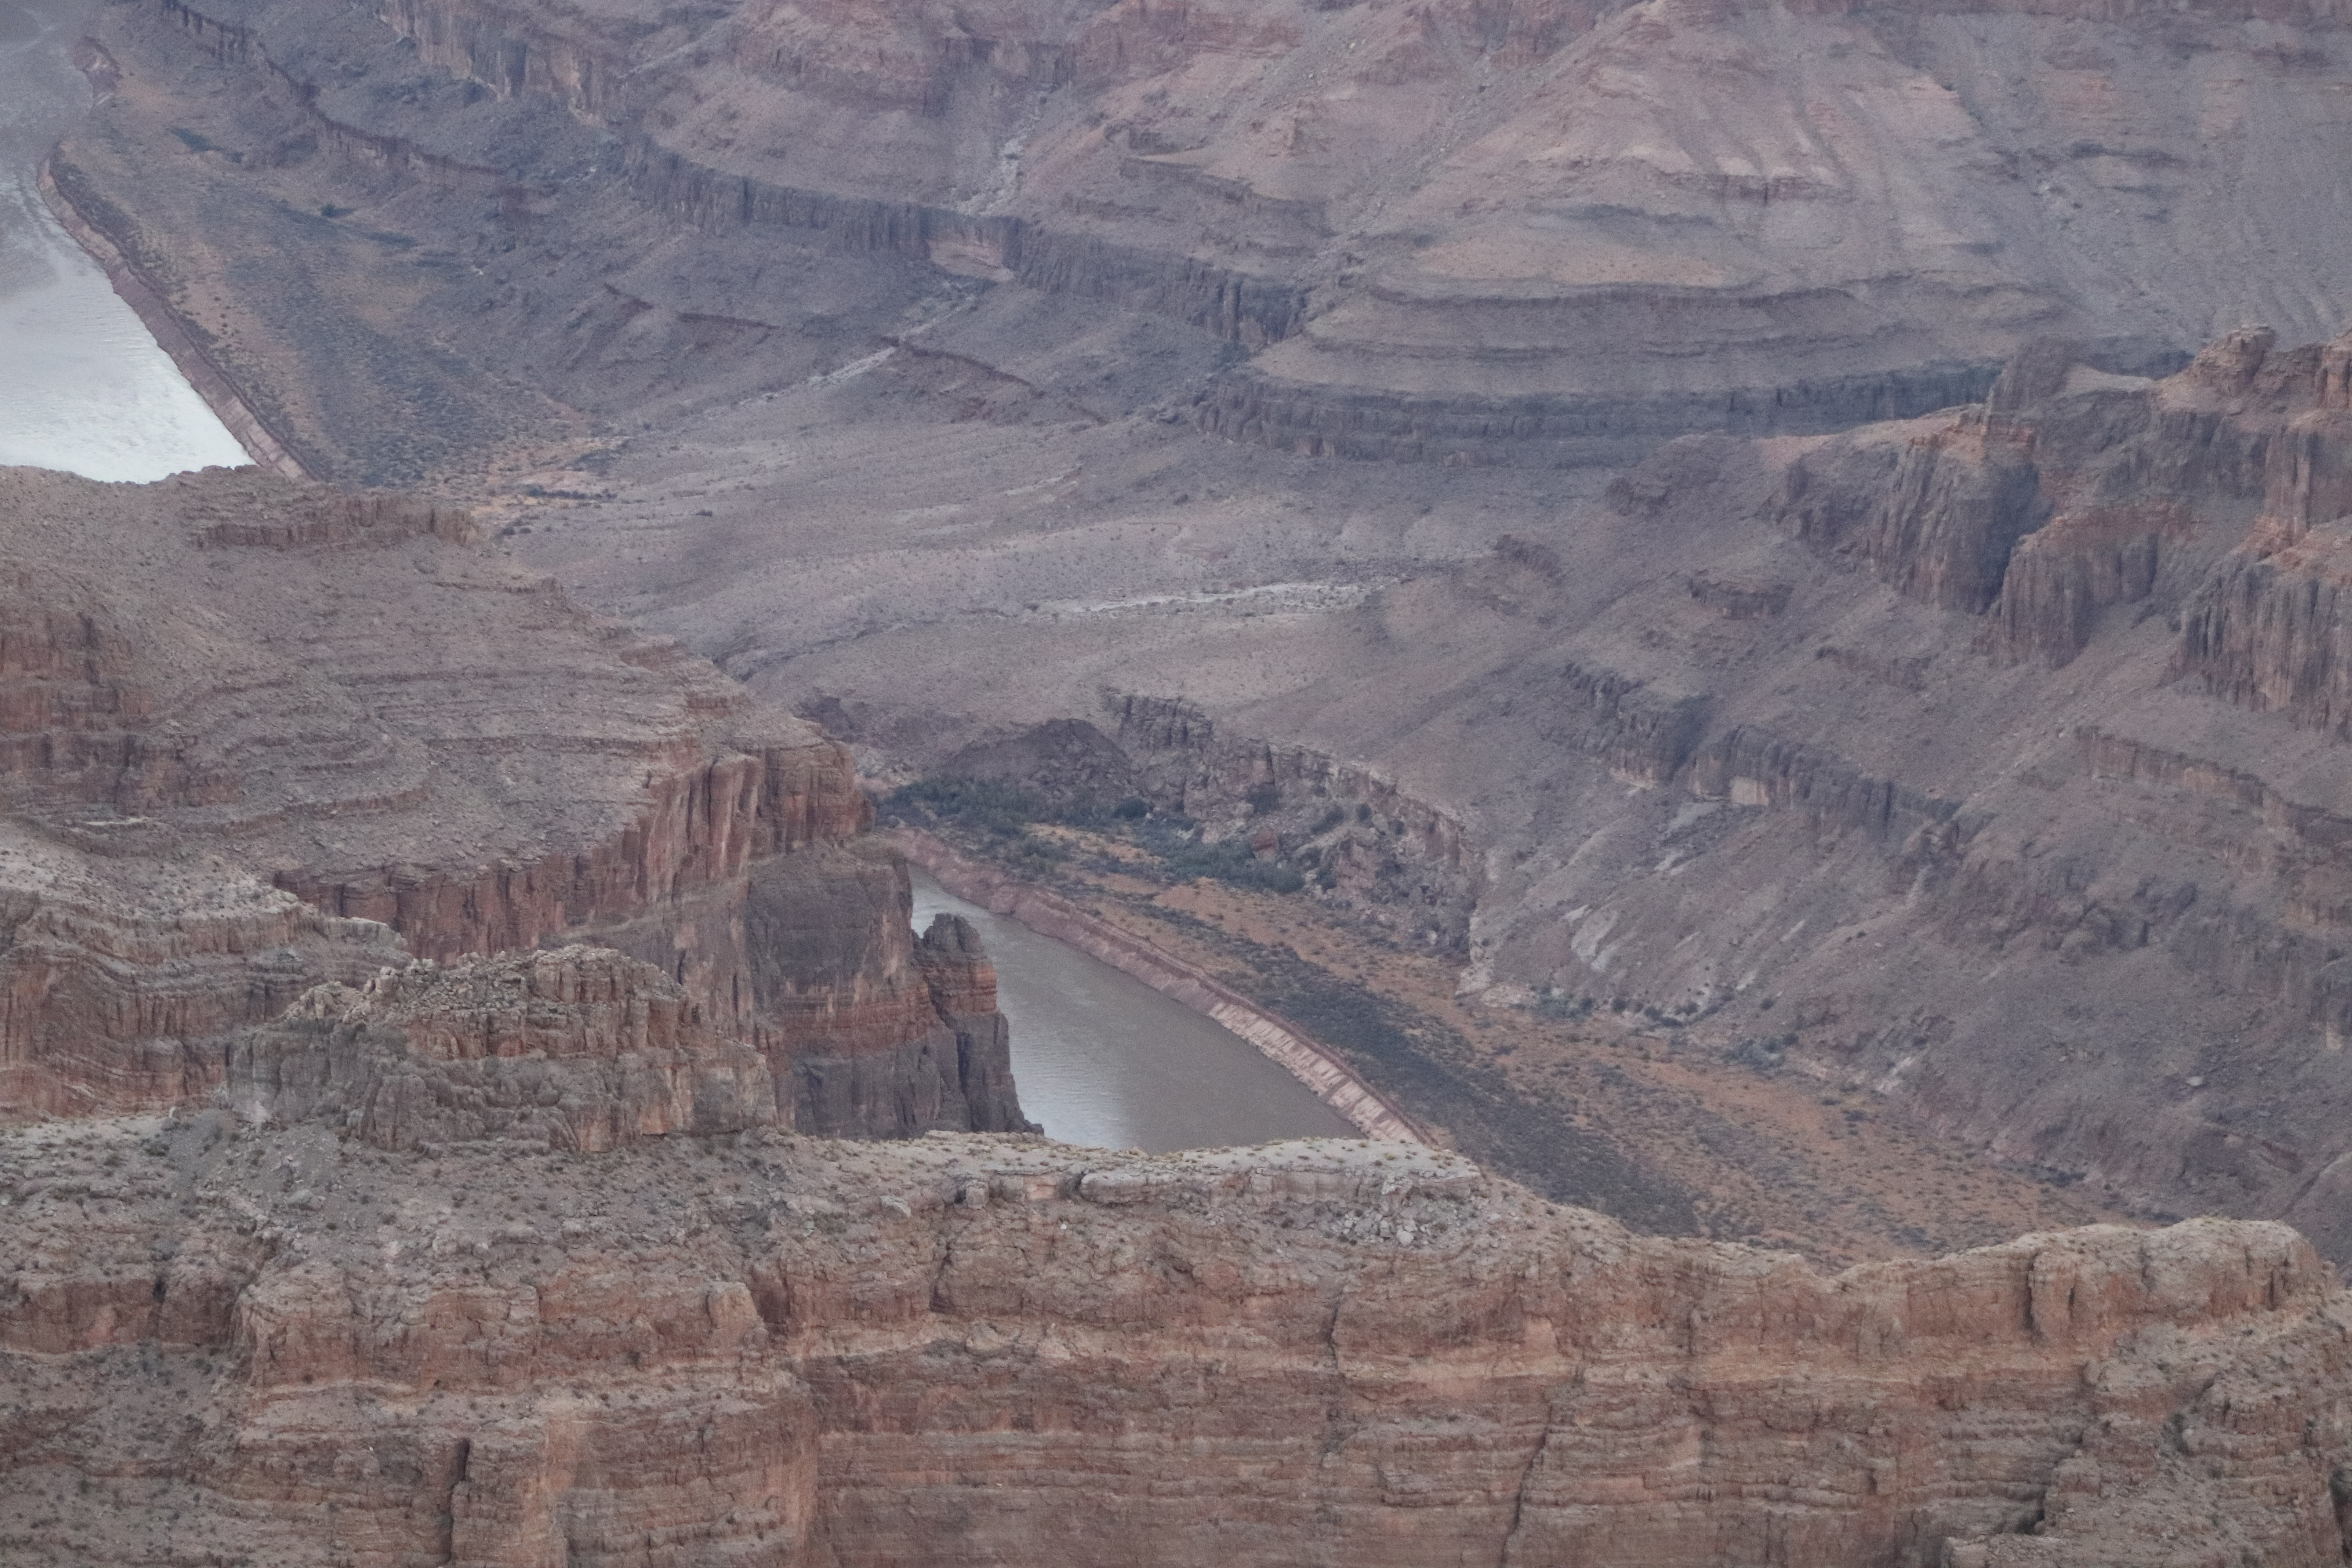 GRAND CANYON WEST